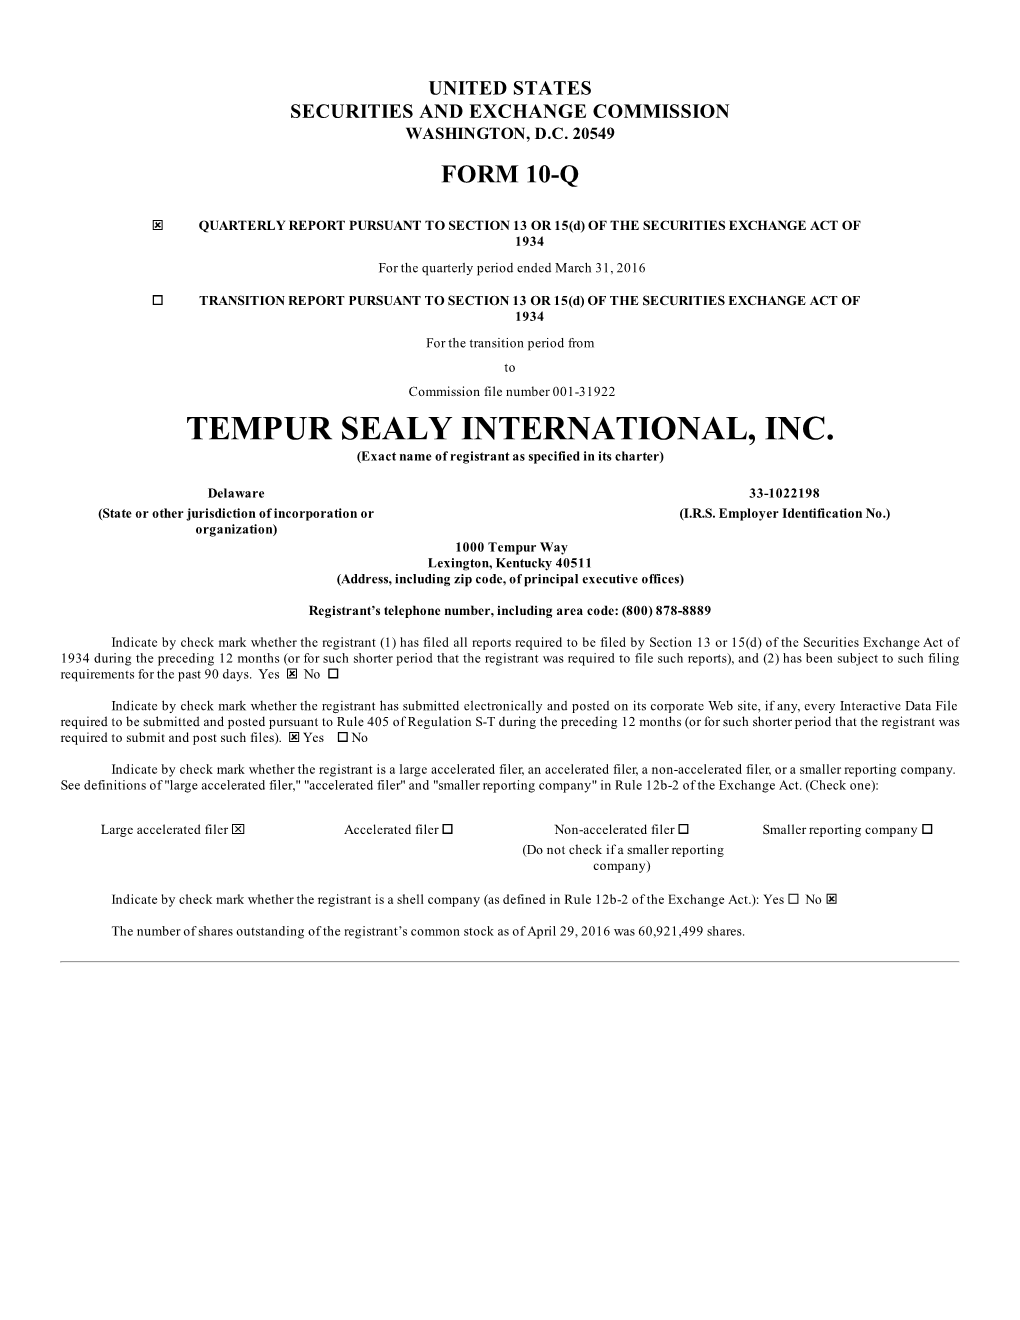 TEMPUR SEALY INTERNATIONAL, INC. (Exact Name of Registrant As Specified in Its Charter)